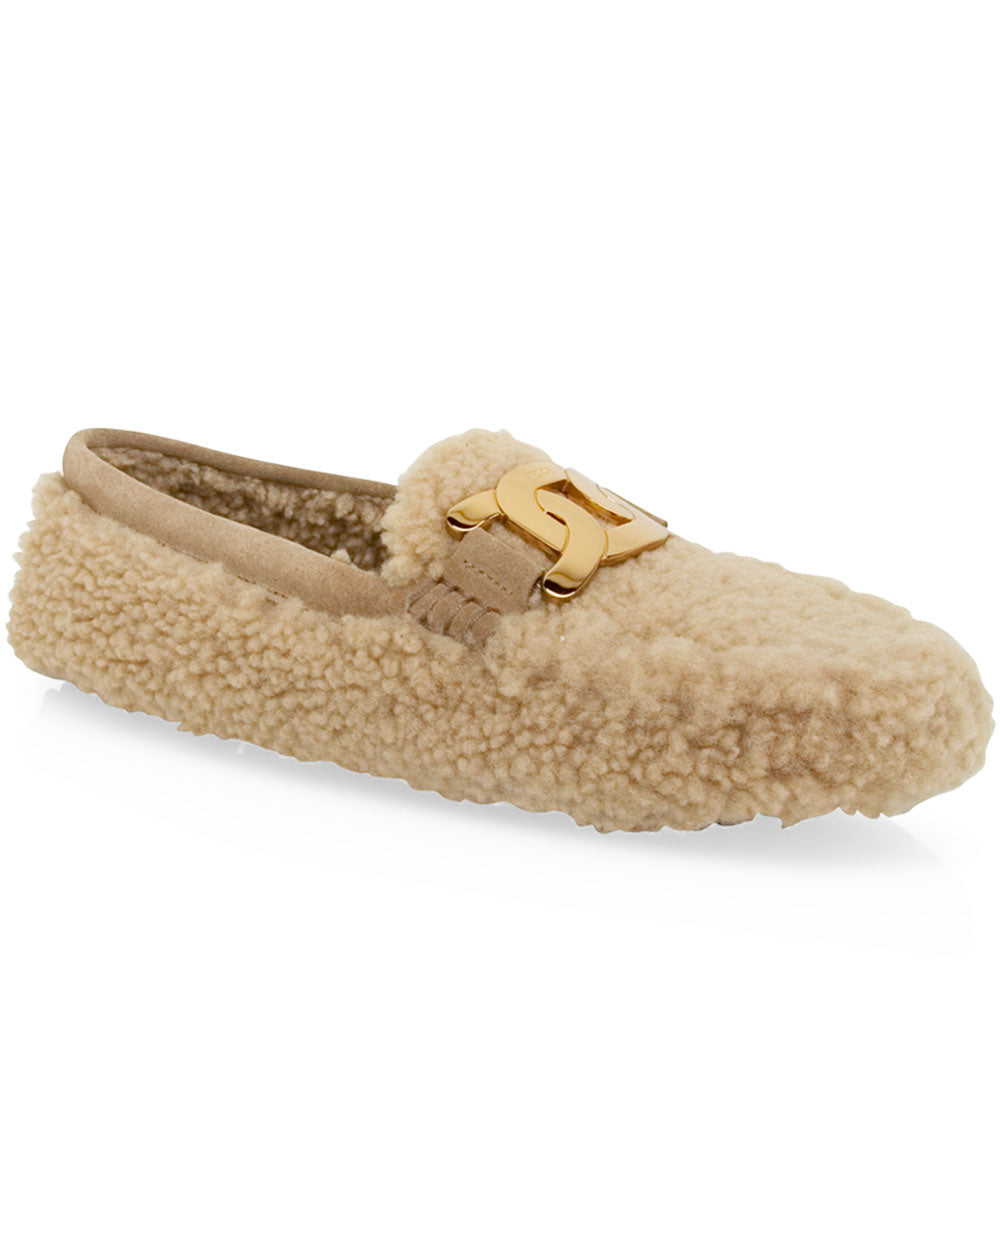 Gommino Shearling Loafer in Teddy